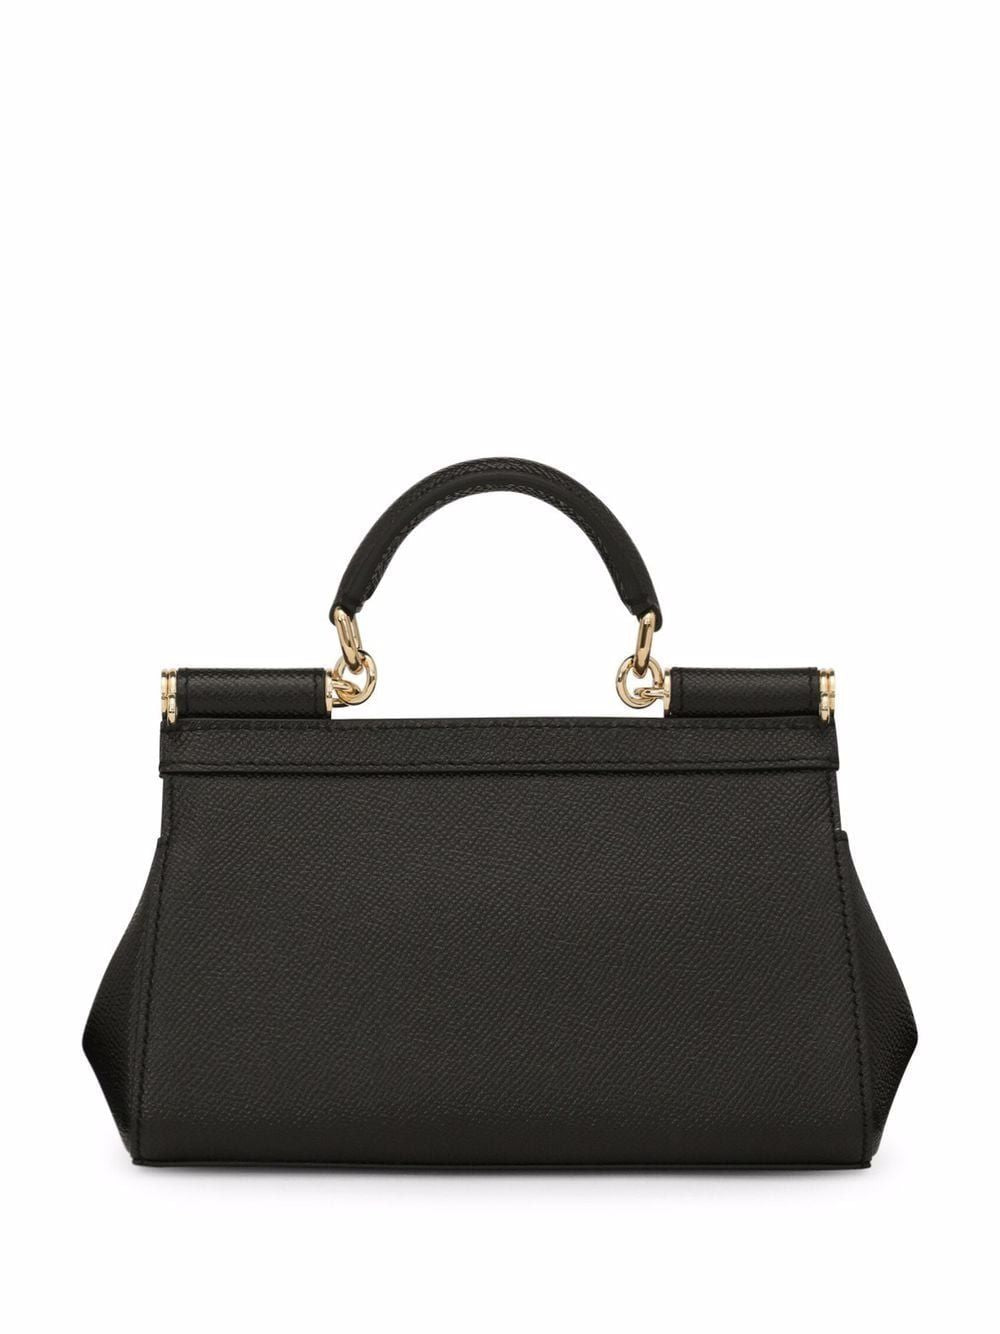 Dolce & Gabbana East West Small Sicily Bag